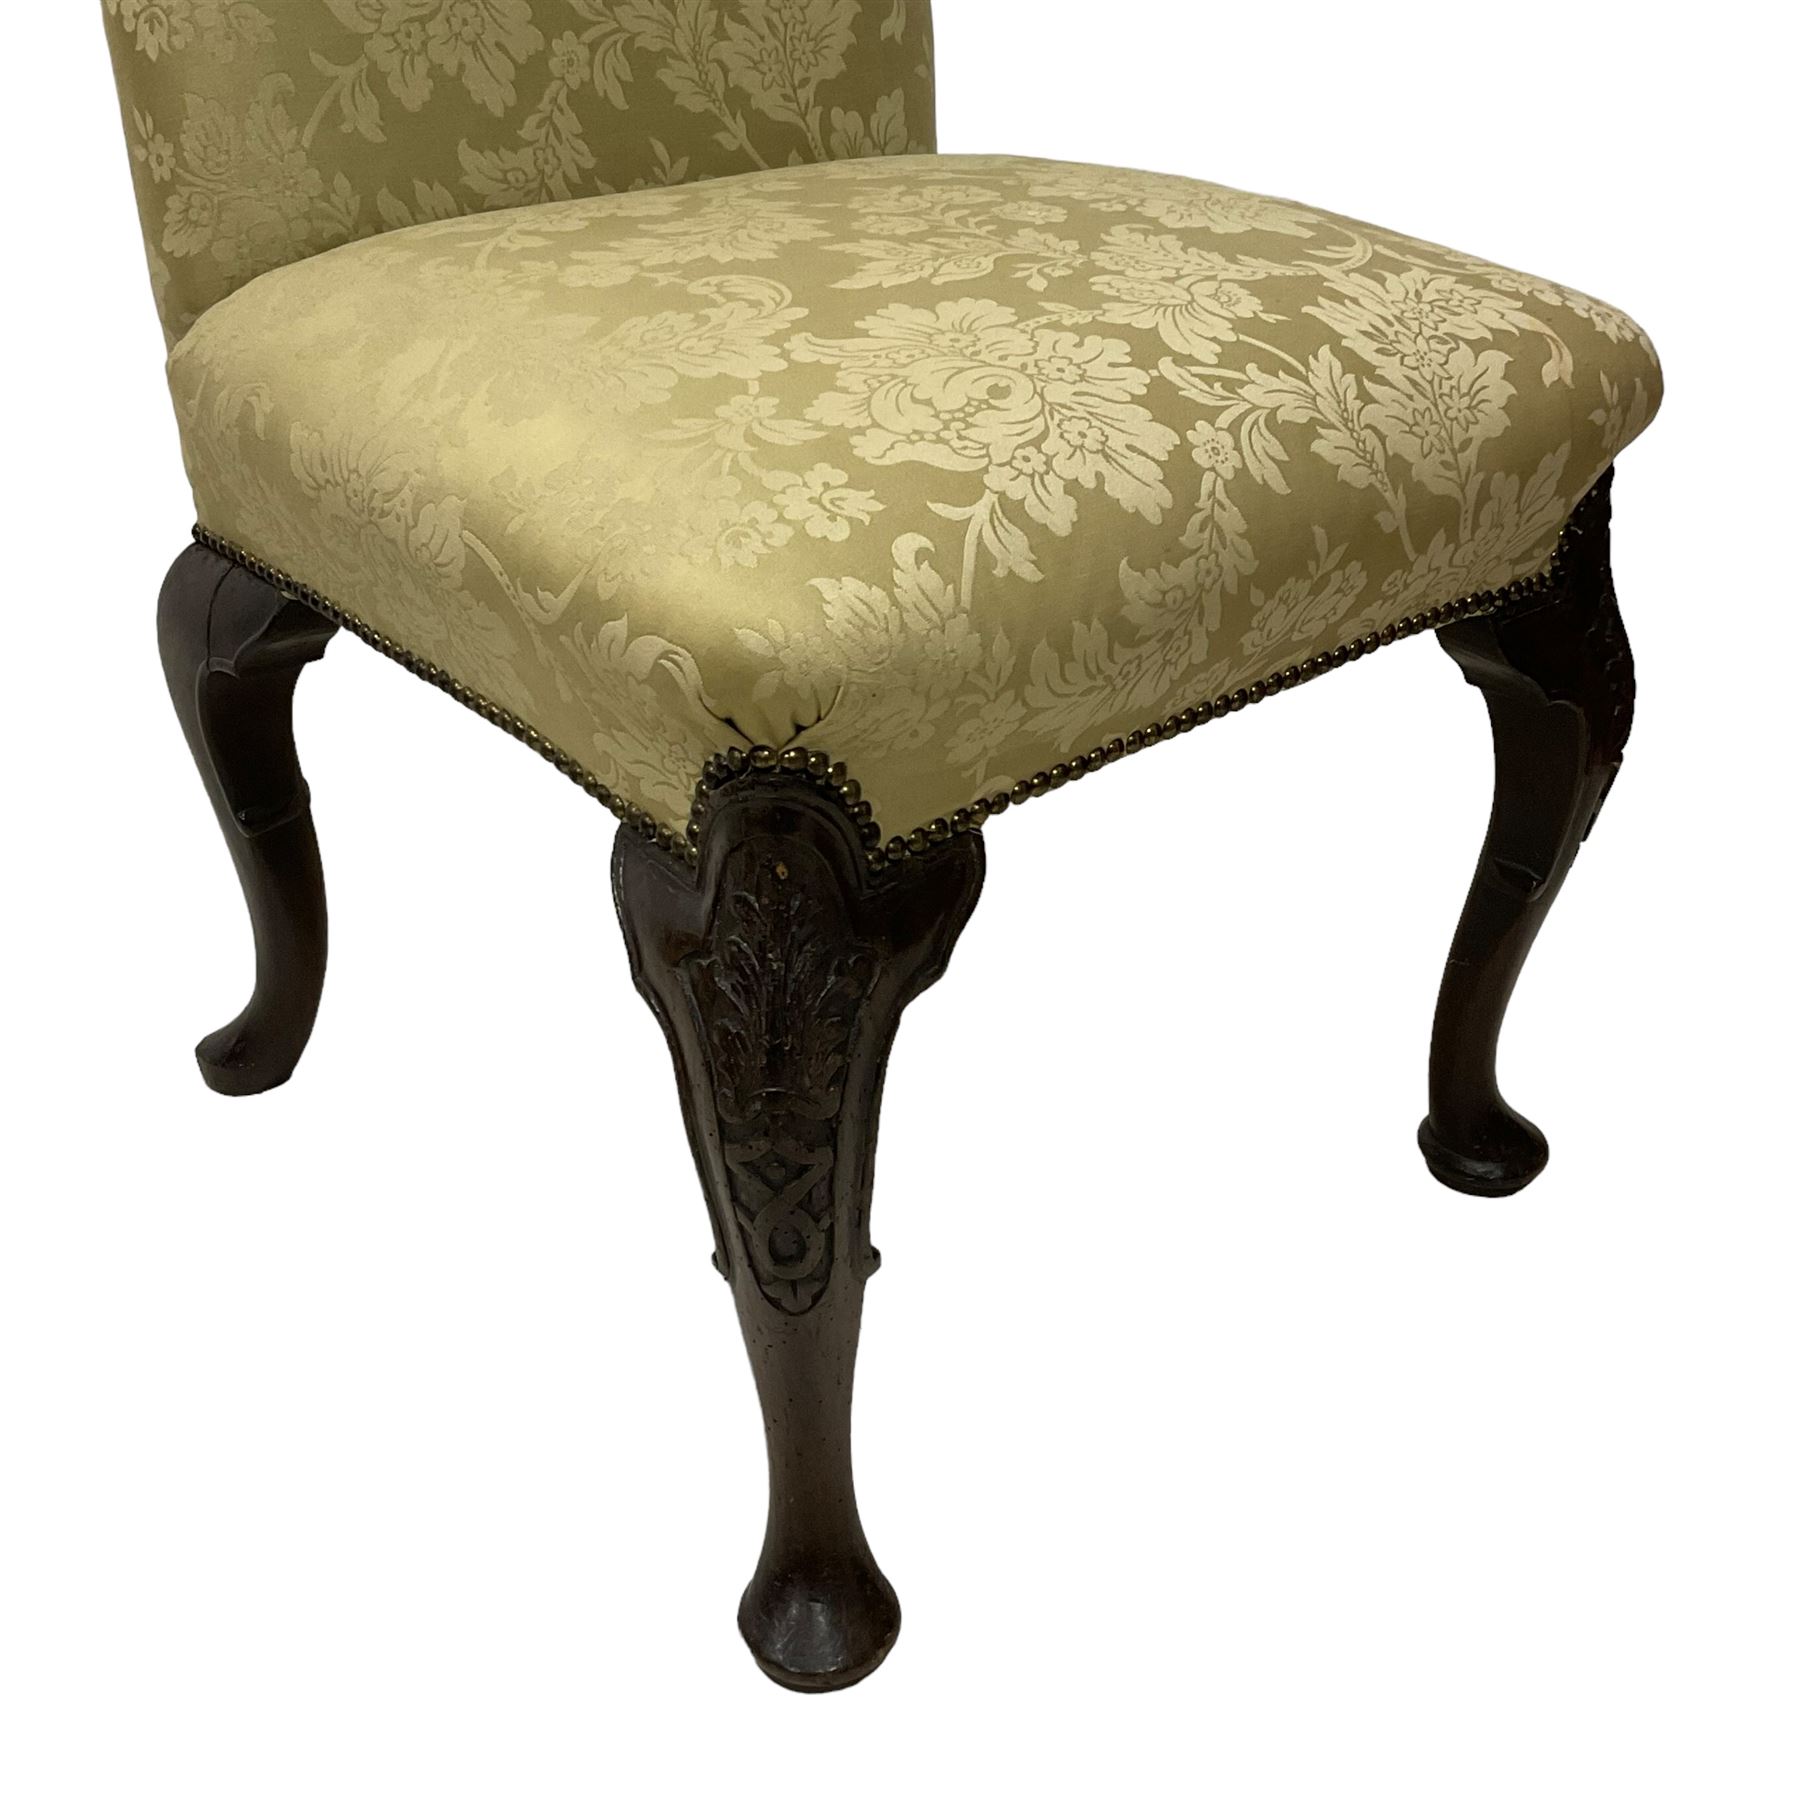 18th century and later walnut side chair - Image 8 of 9